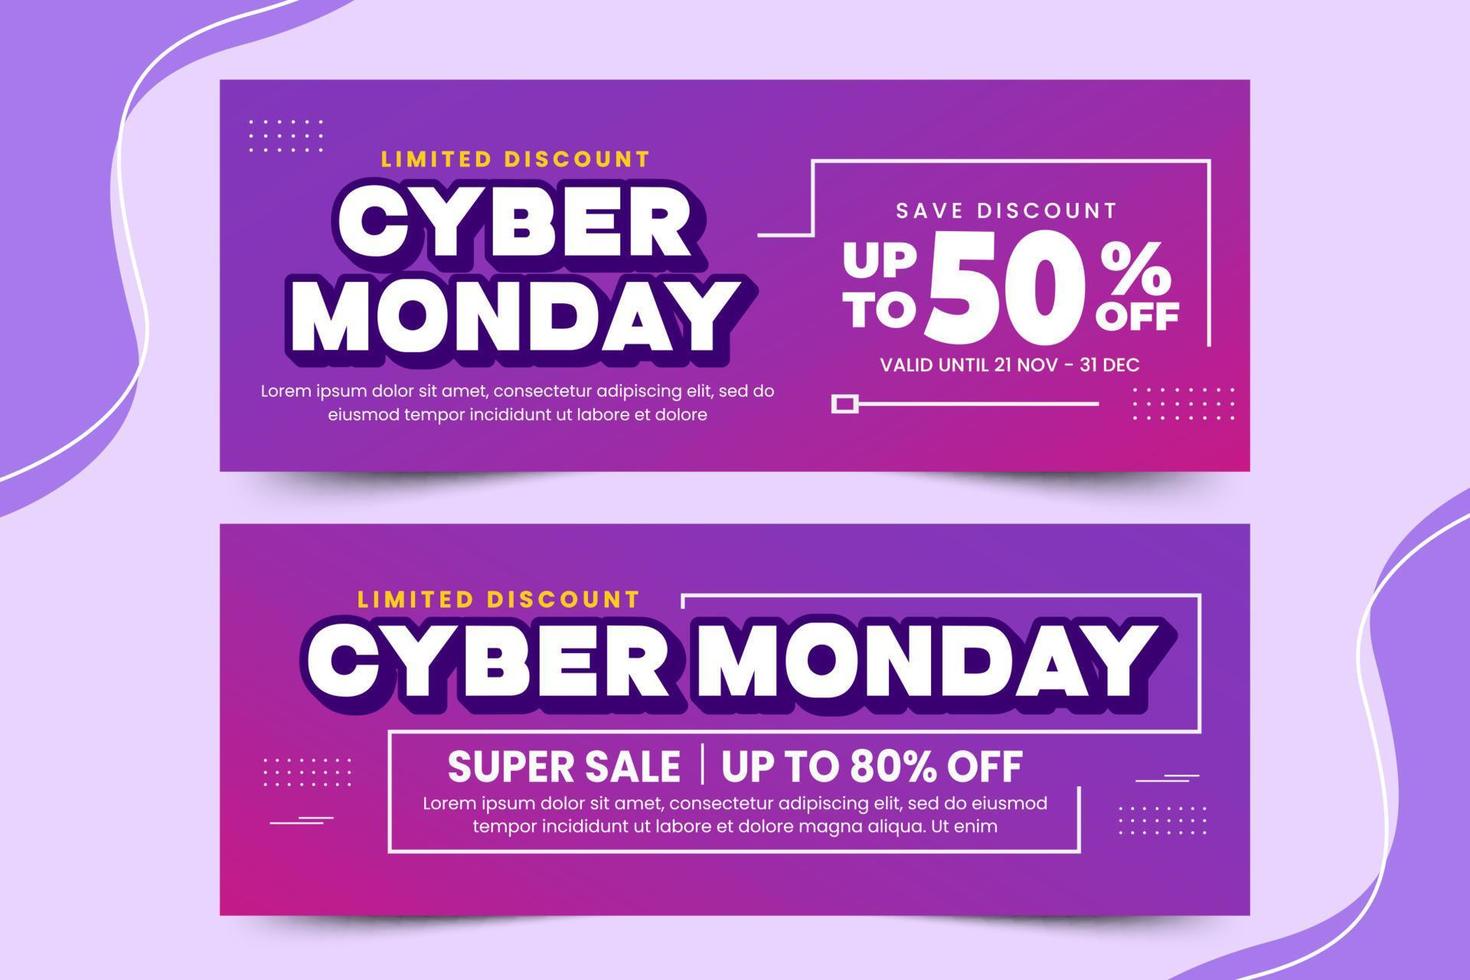 Cyber Monday cover banner design template vector